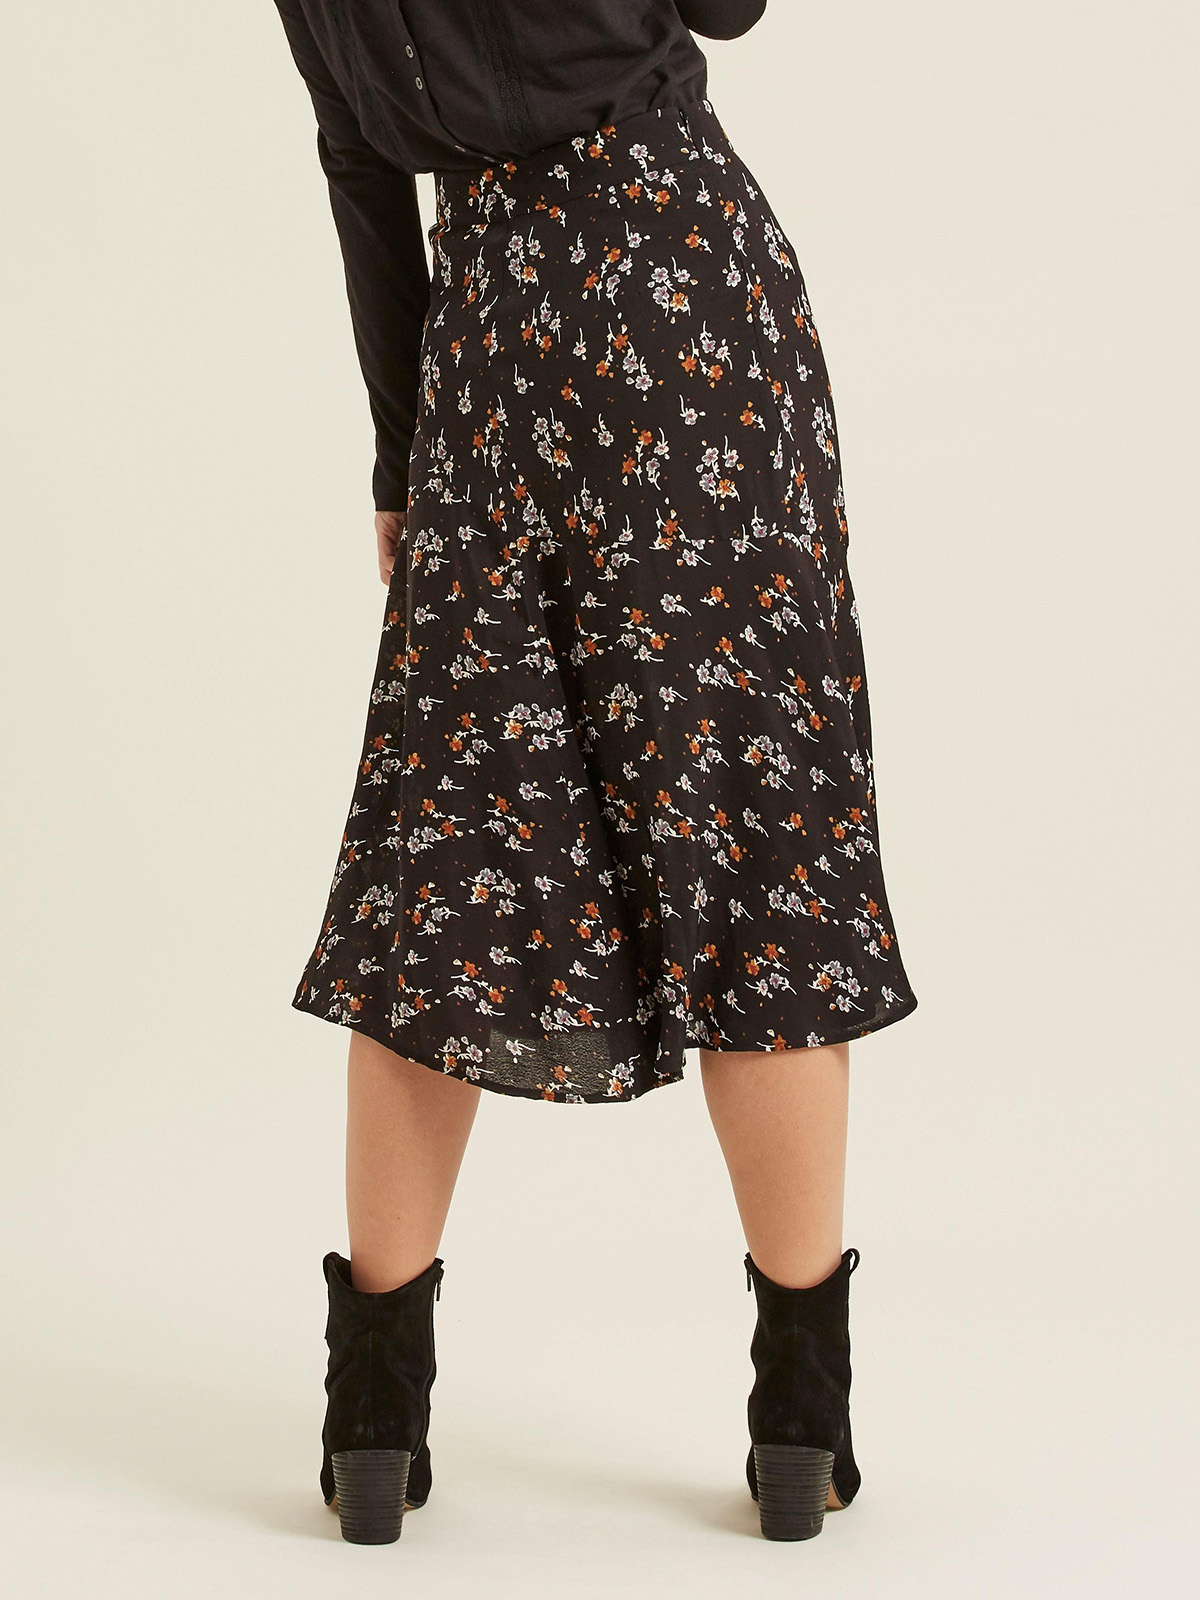 FAT FACE - - Fat Face BLACK Ellie Star Floral Midi Skirt - Size 6 to 18